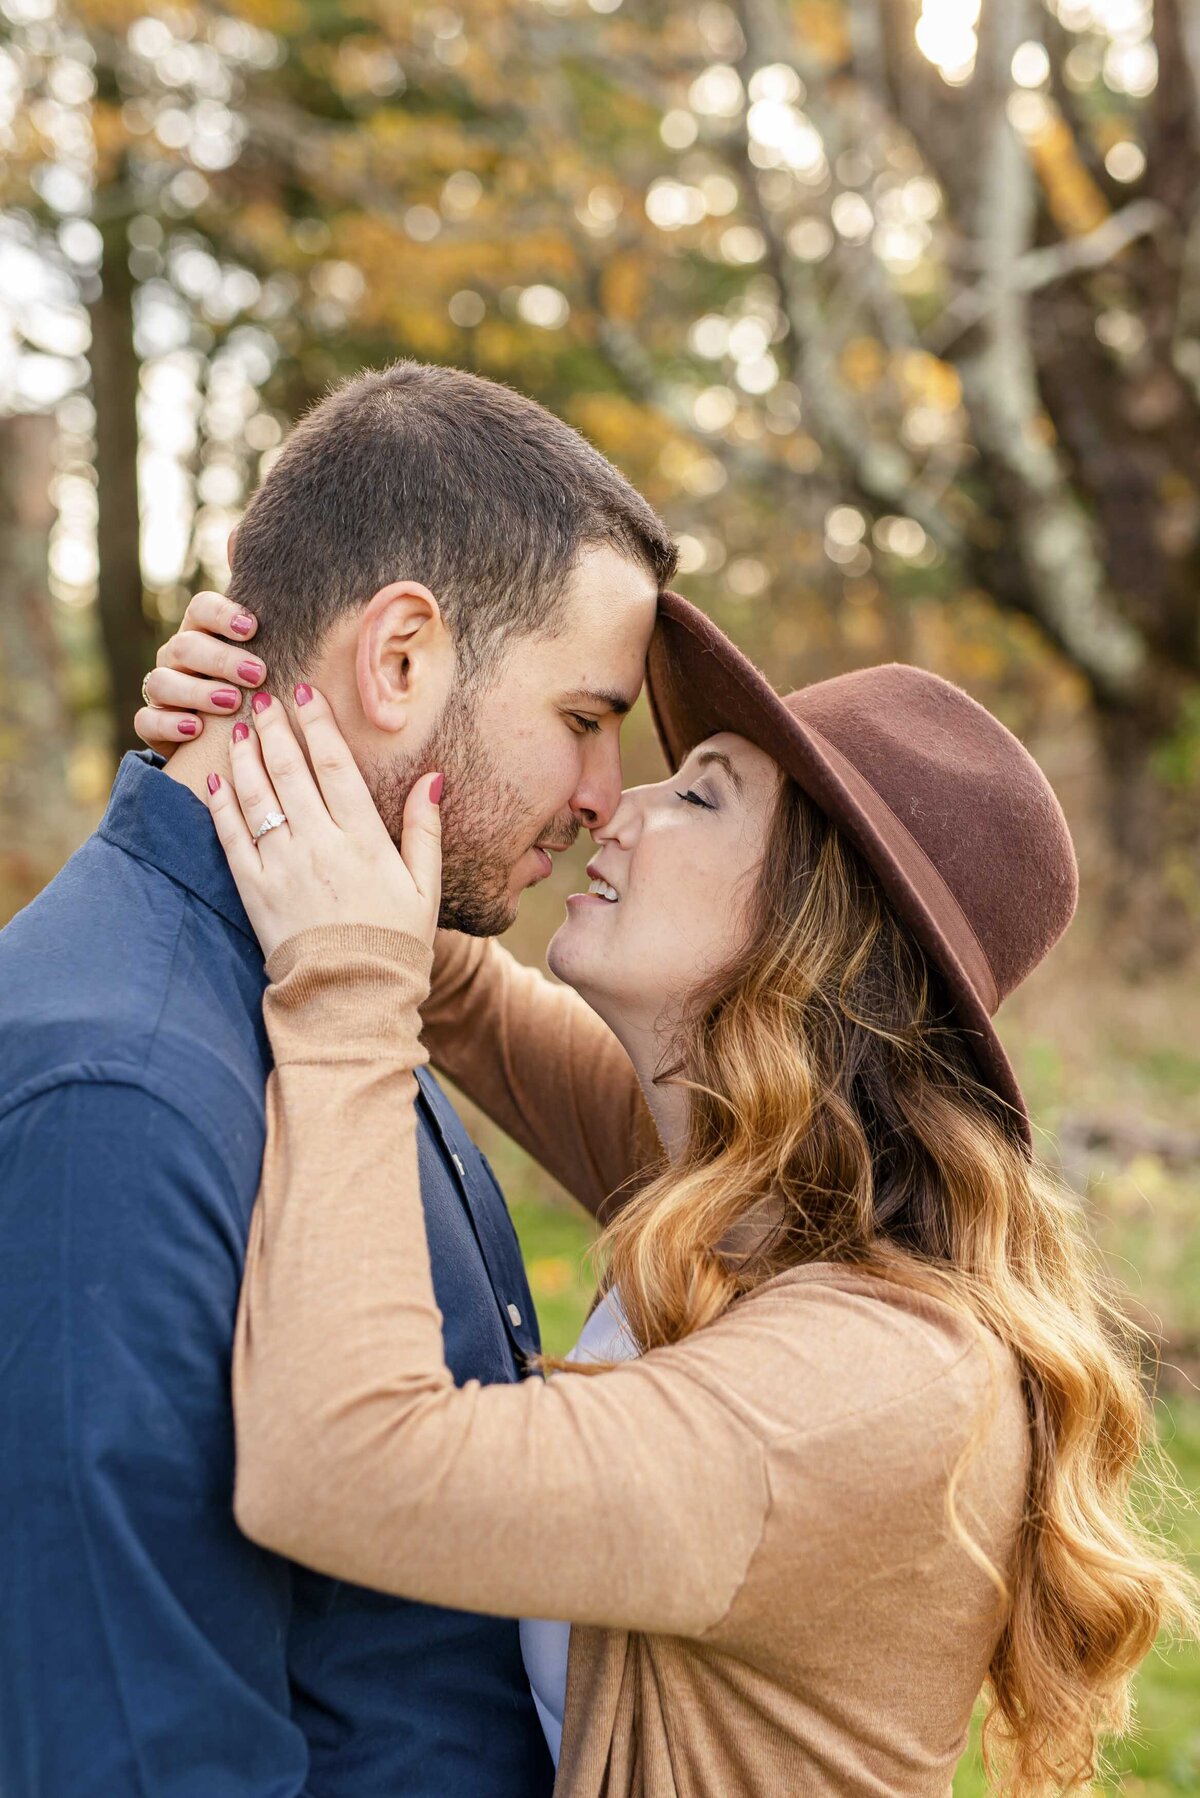 Kate and Zach’s fall engagement session photographed by Schwalbs Photography